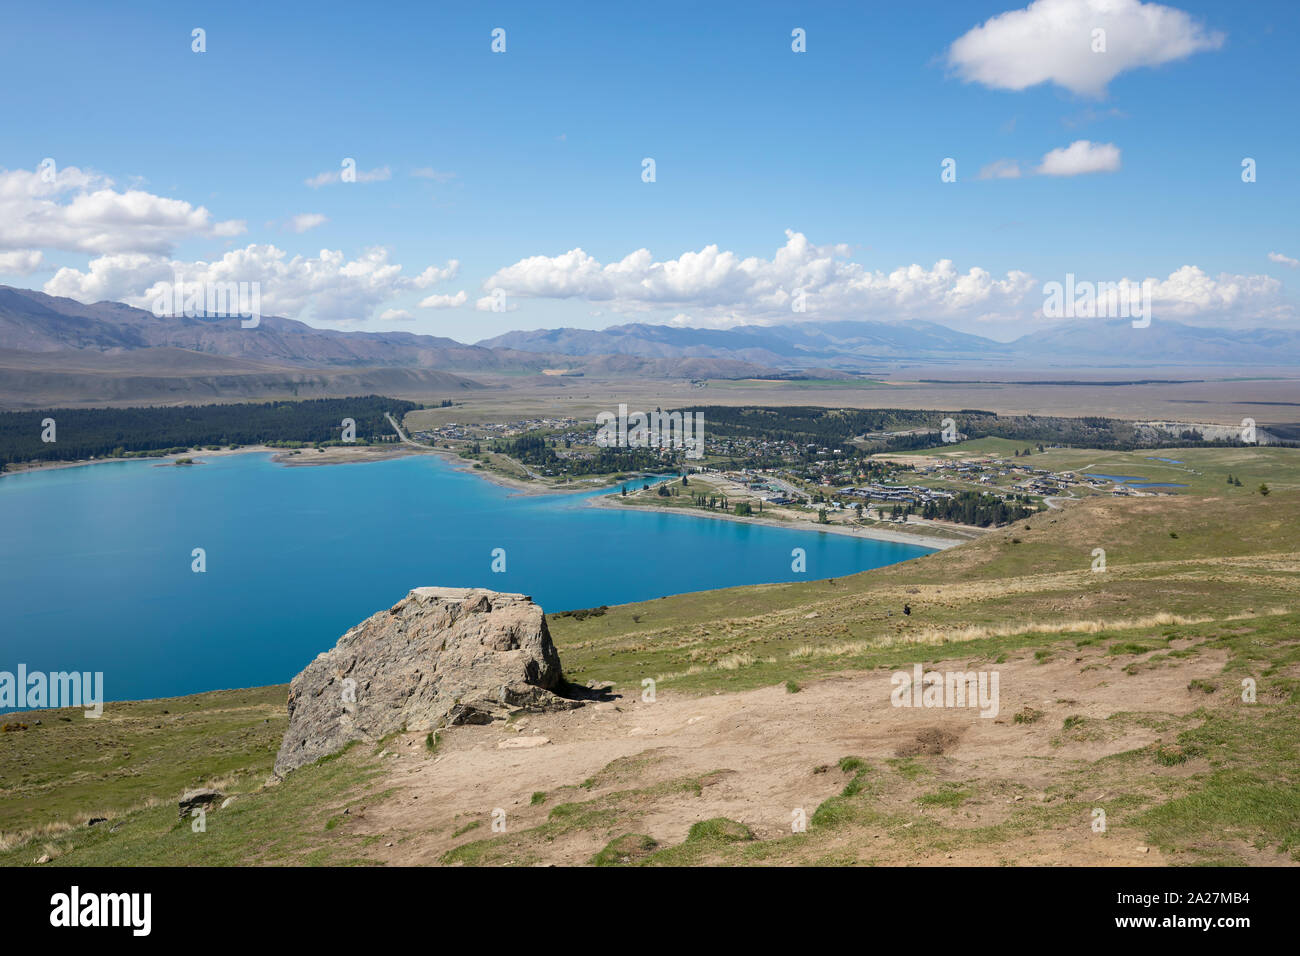 Panoramic view of the town Lake Tekapo and observatory in the South Island of New Zealand Stock Photo